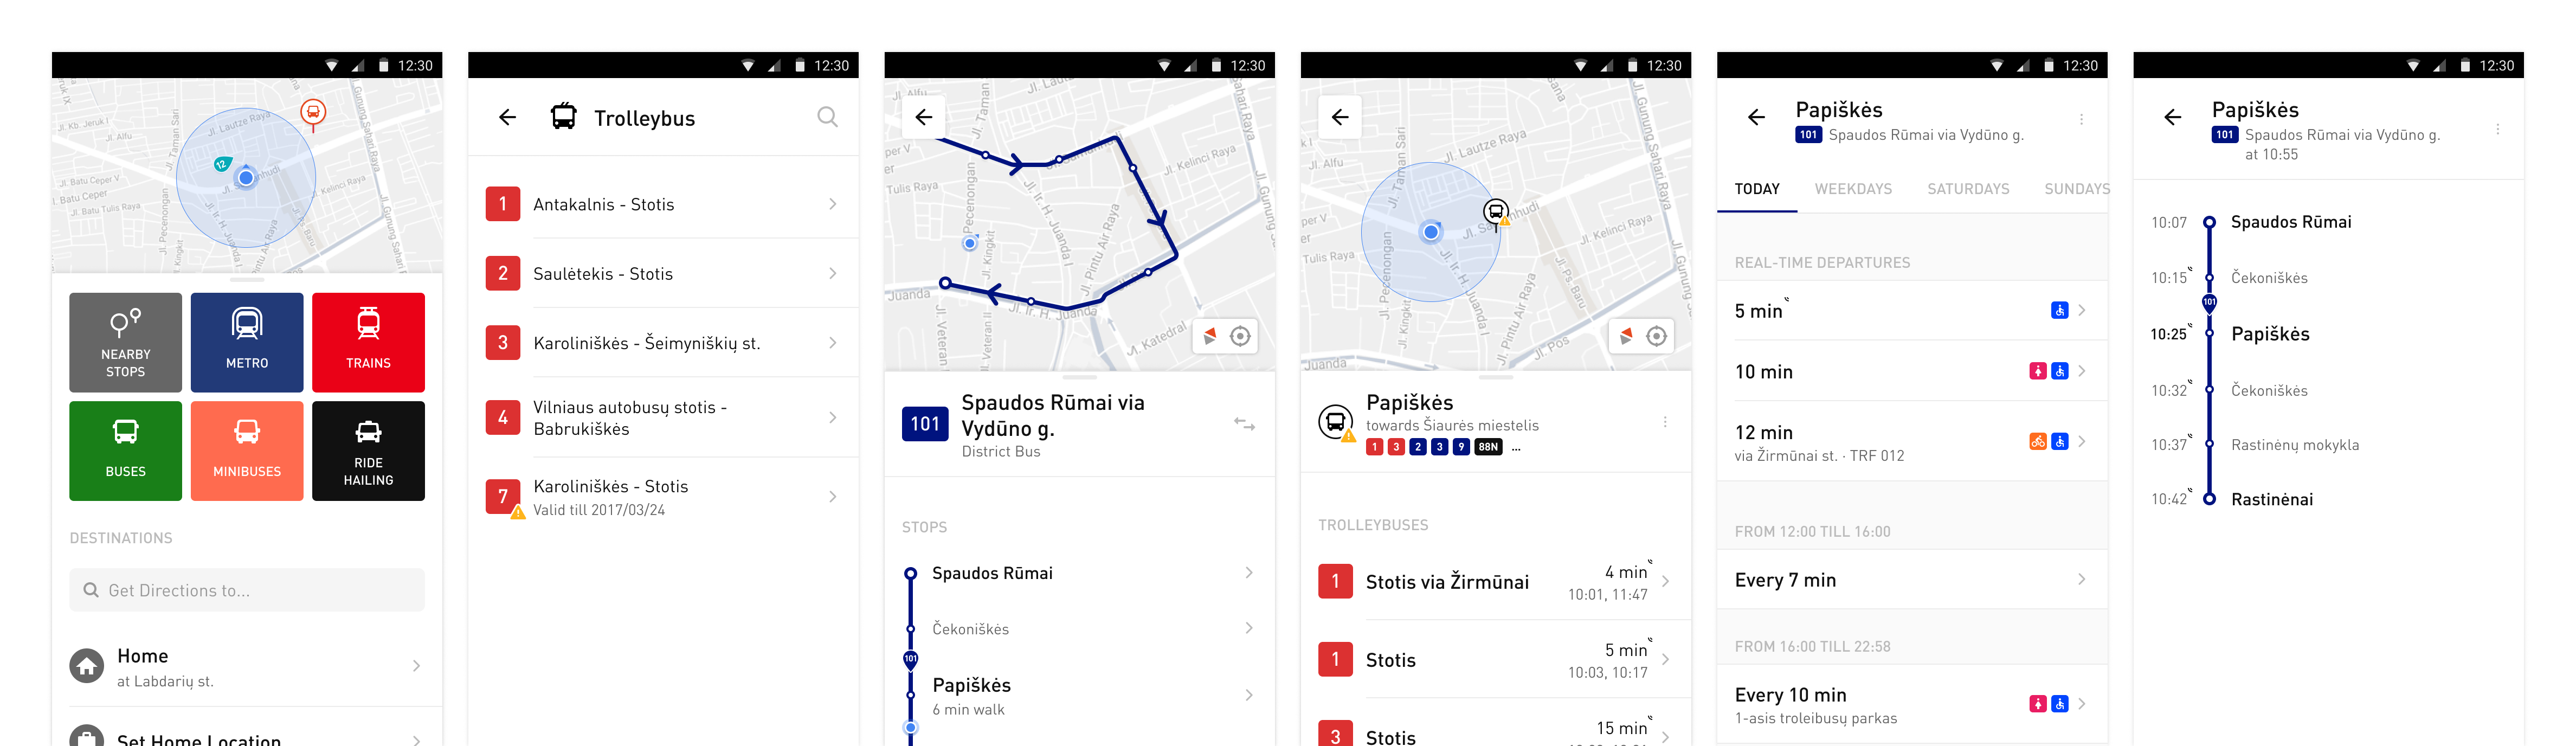 Mains screens of schedules flow — Home, Transport List, Nearby Stops, Track, Stop, Times and Run.